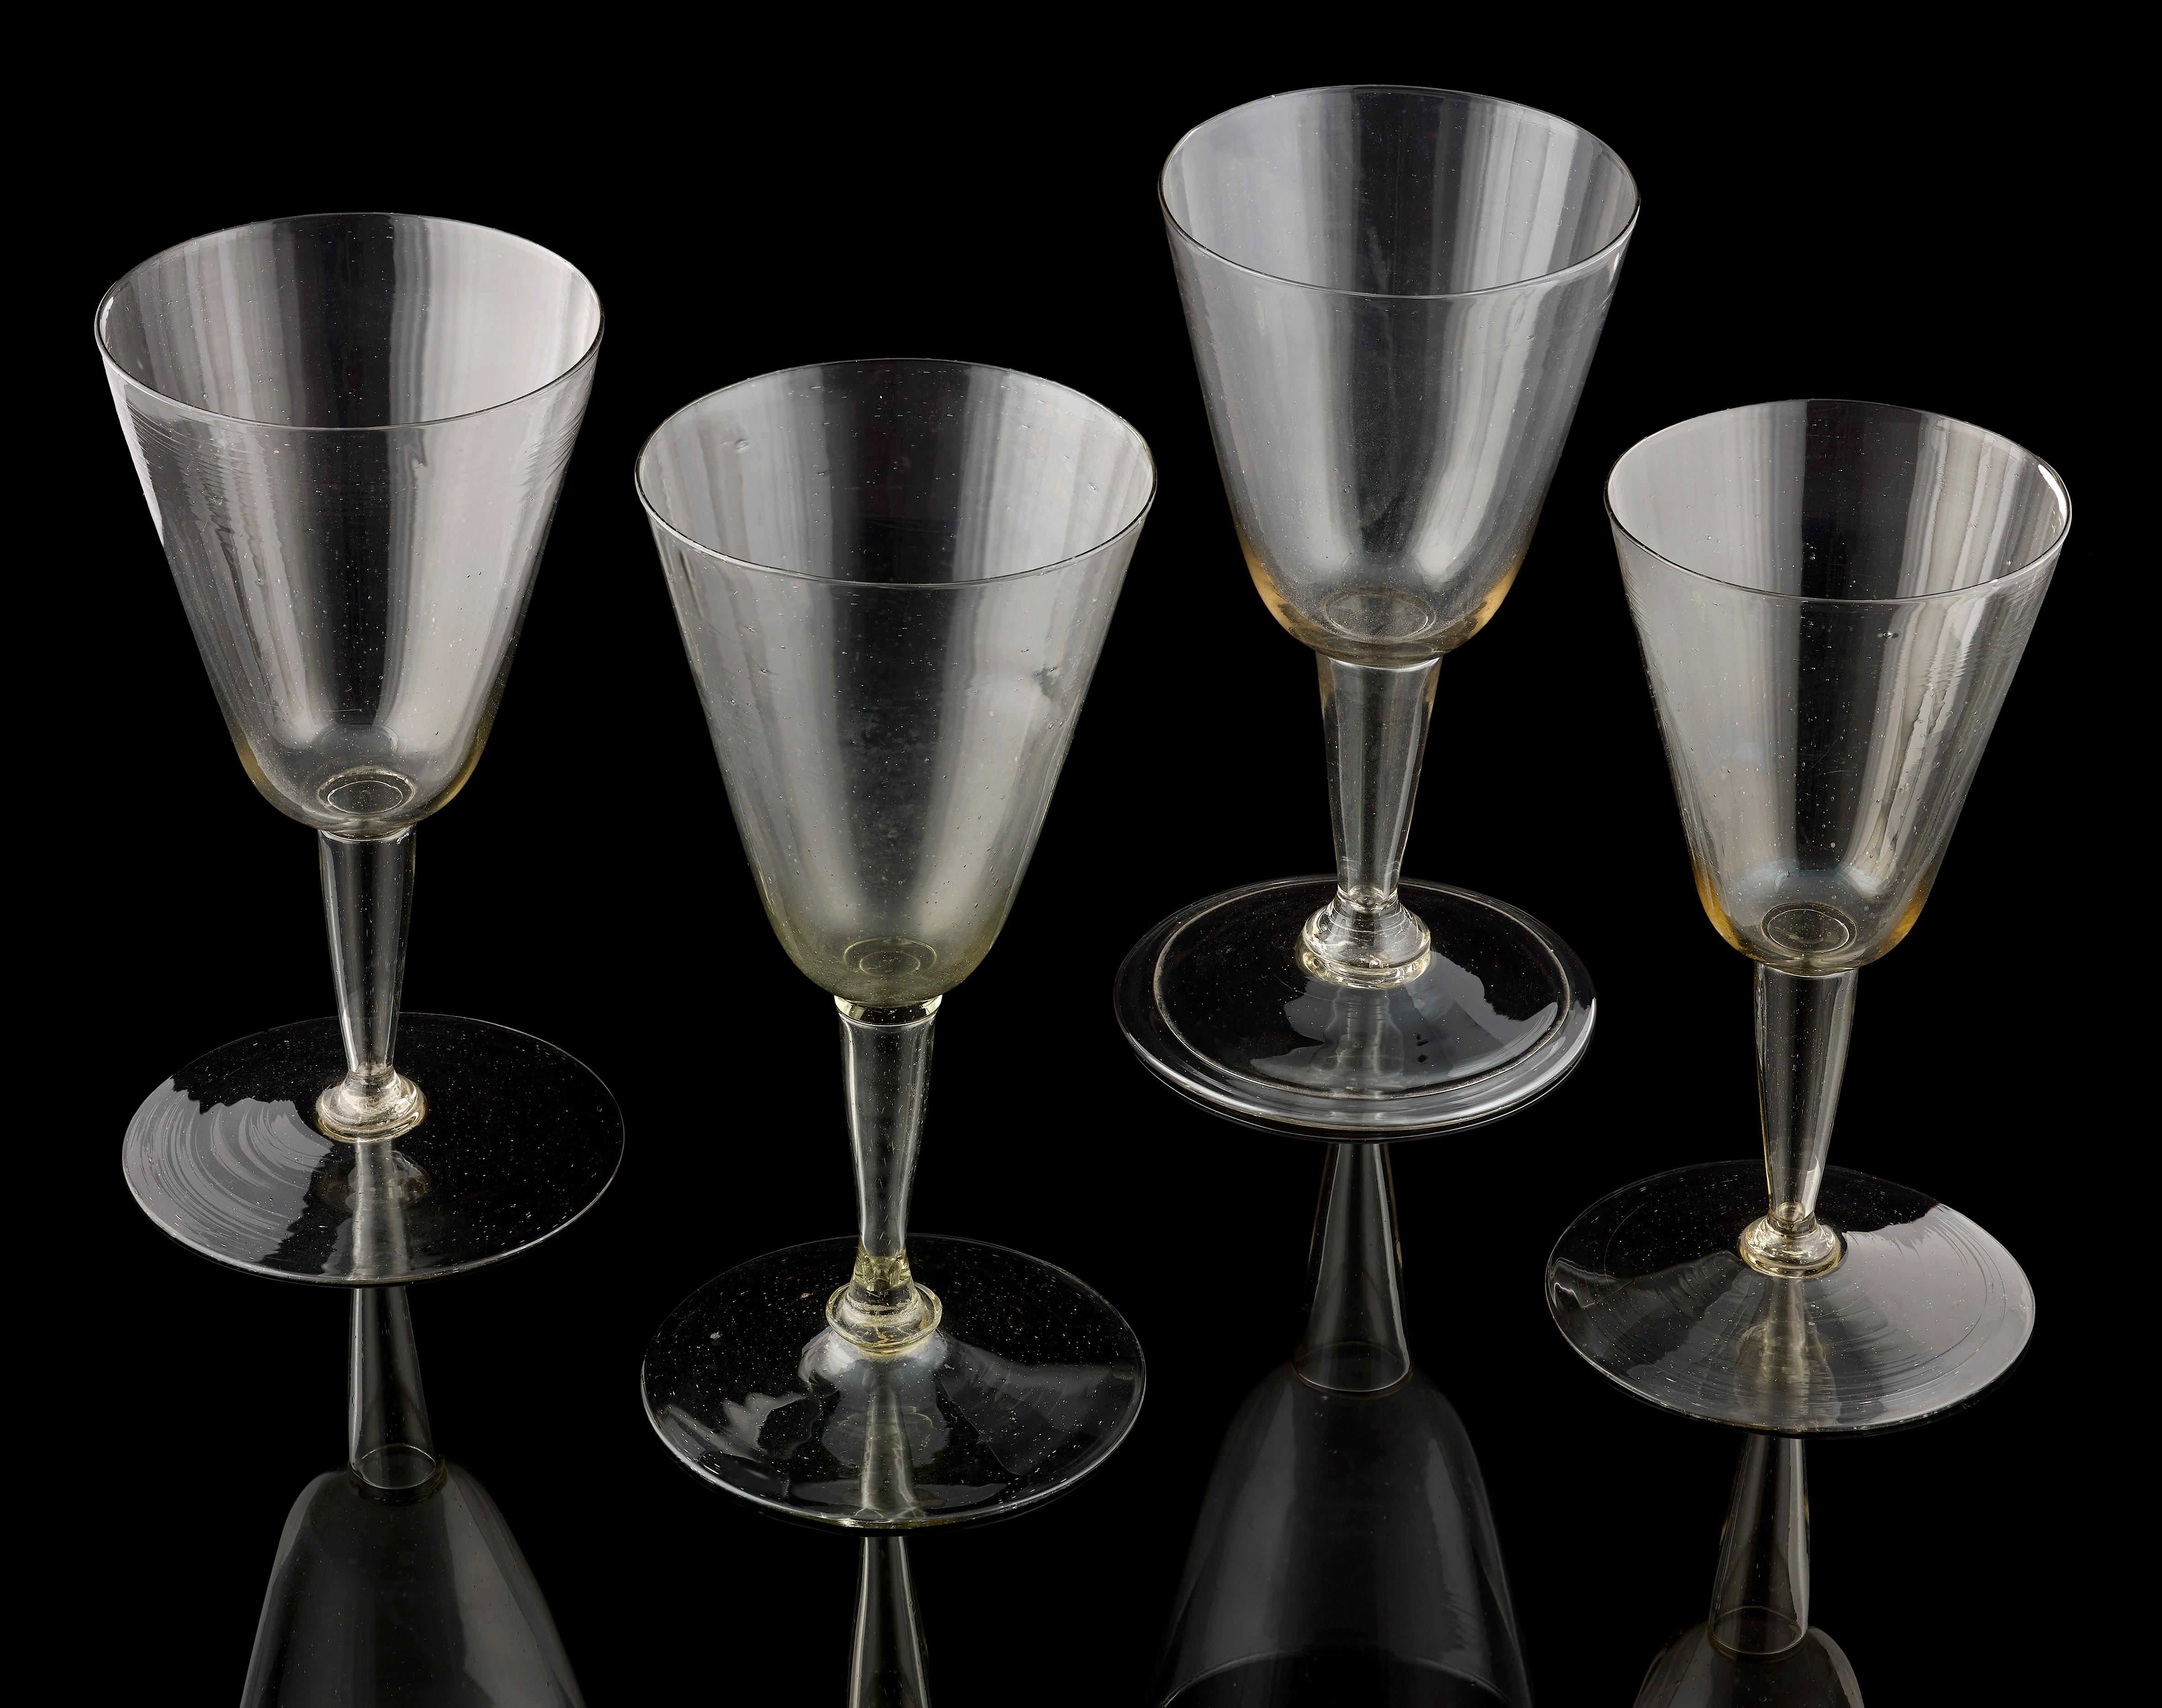 An unusual 'set' of 4 Cristallo glasses; Venetian, early 17th century; of slightly varying size, but all of similar design with a conical bowl over a hollow, conical stem; one with a folded foot, the others plain; the tallest is 15 cms high and the